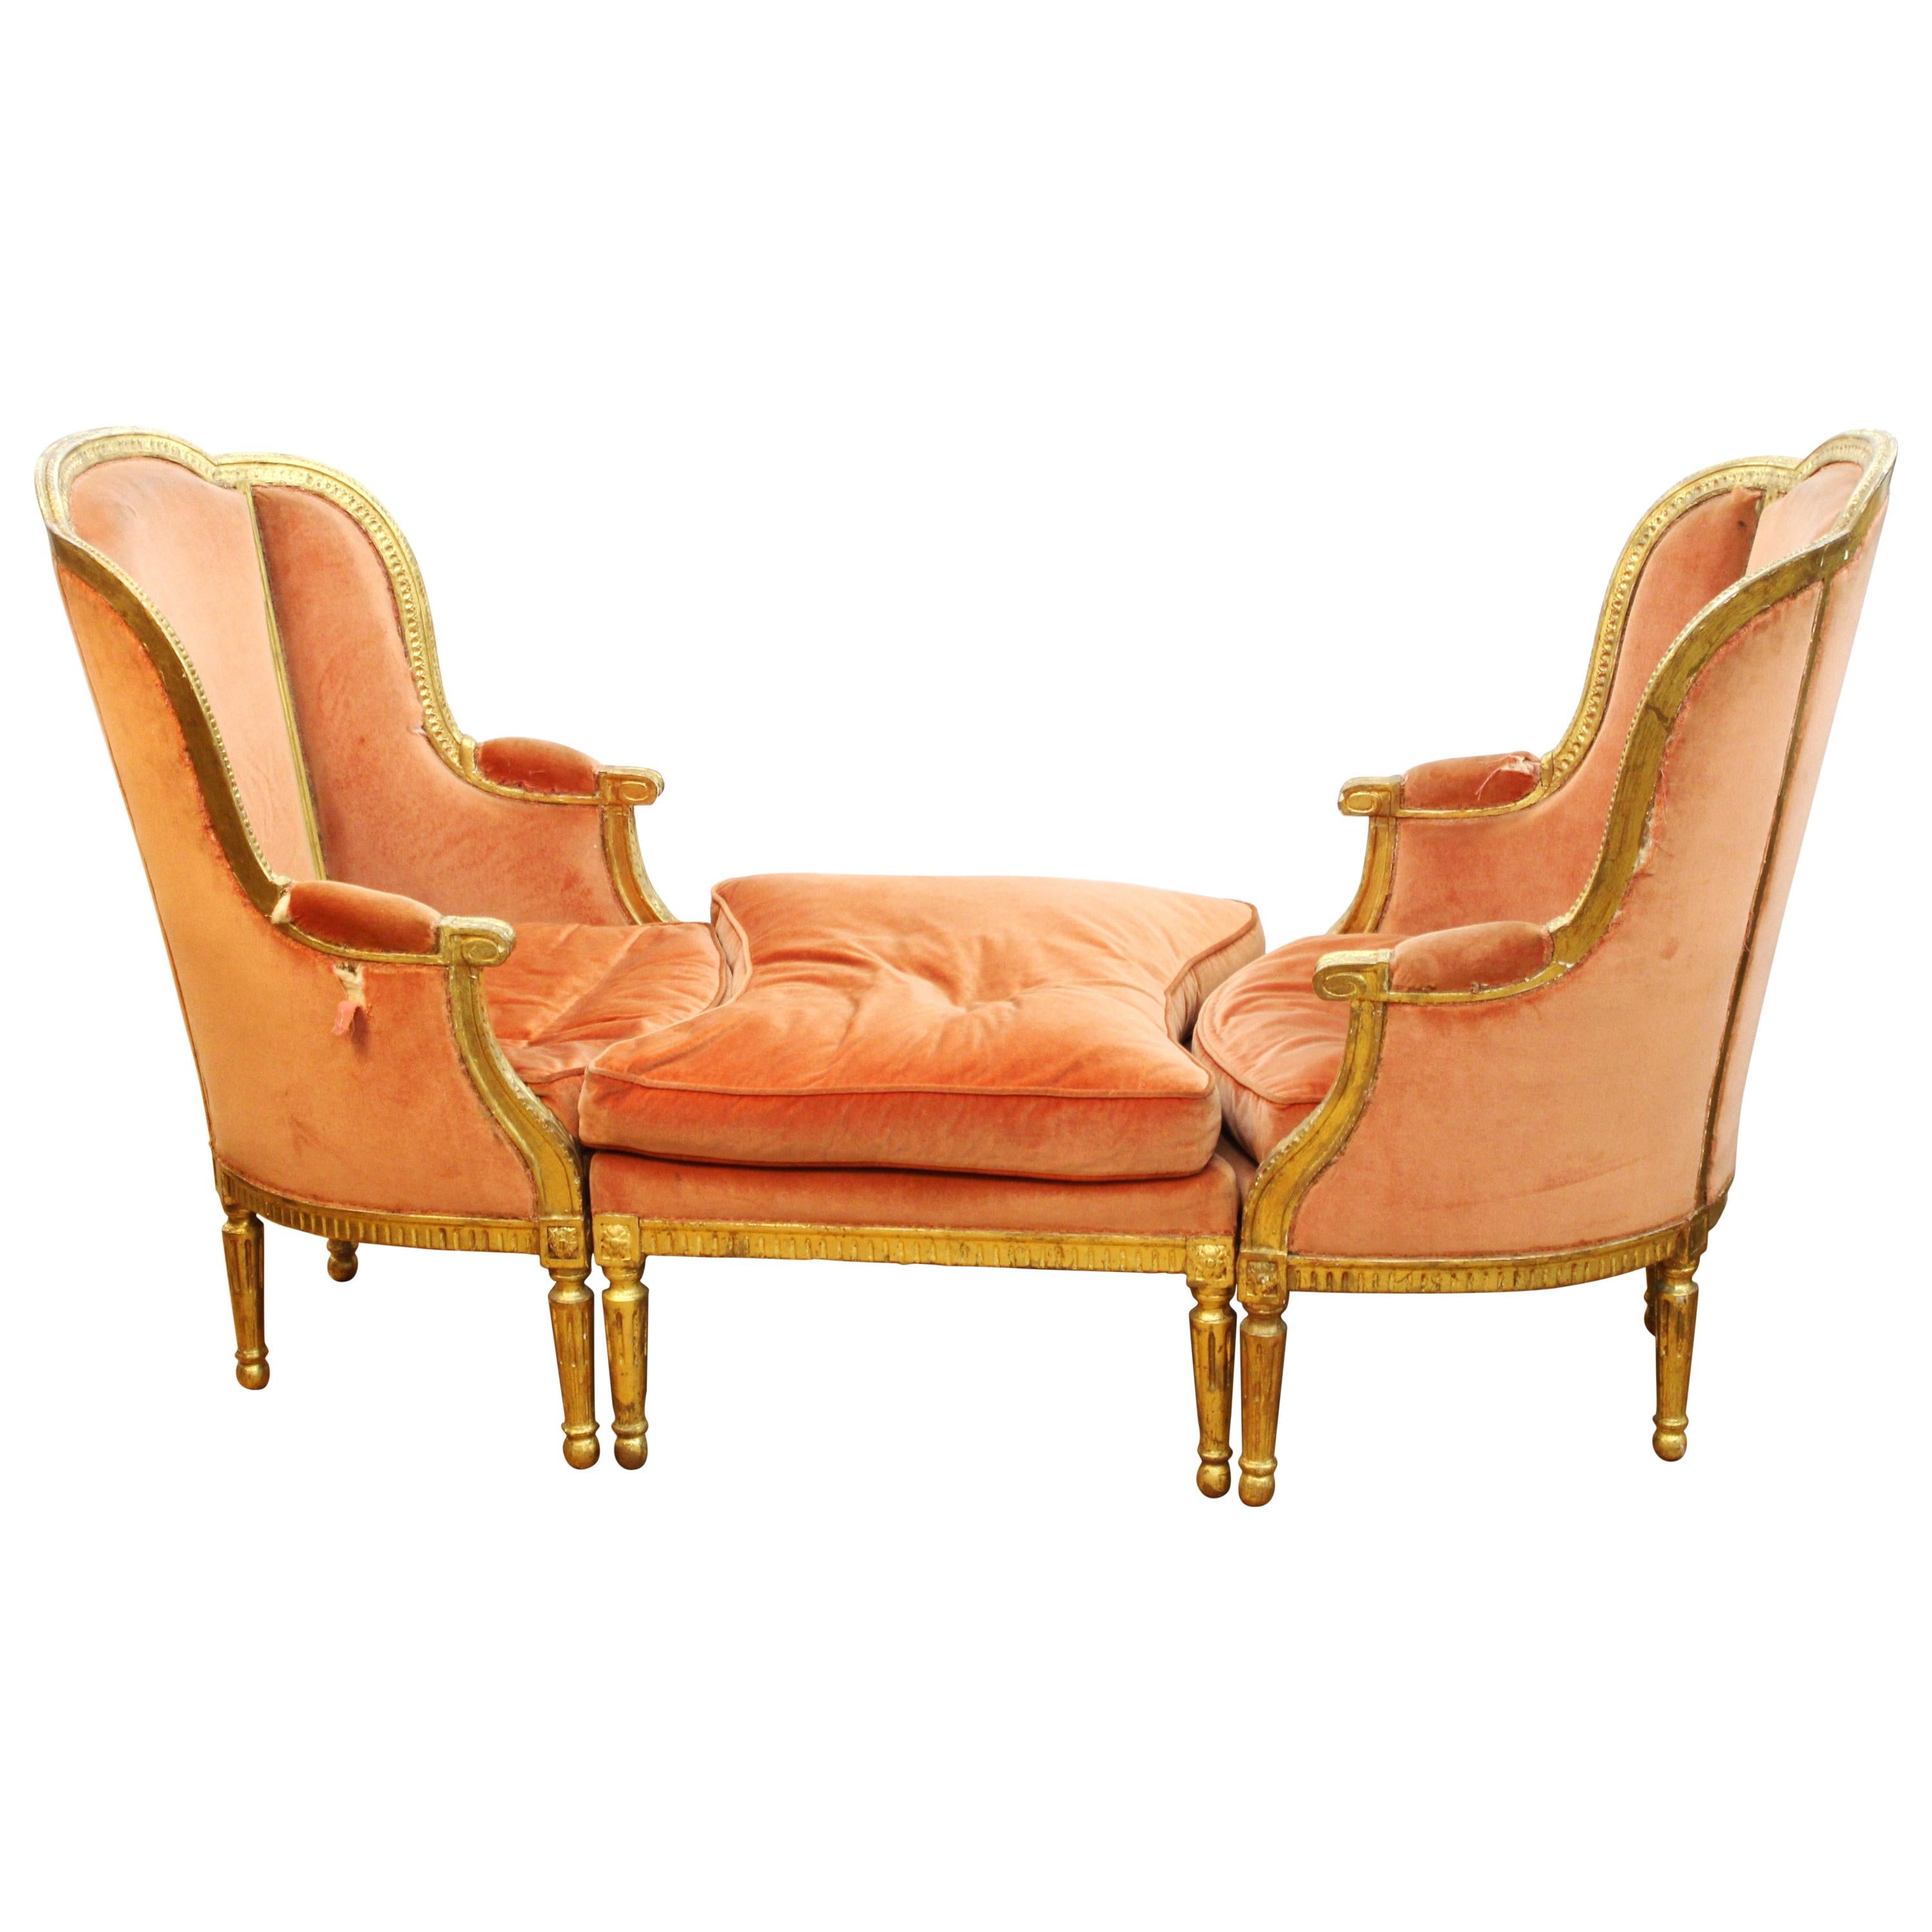 French Louis XVI Style Chaise Longue